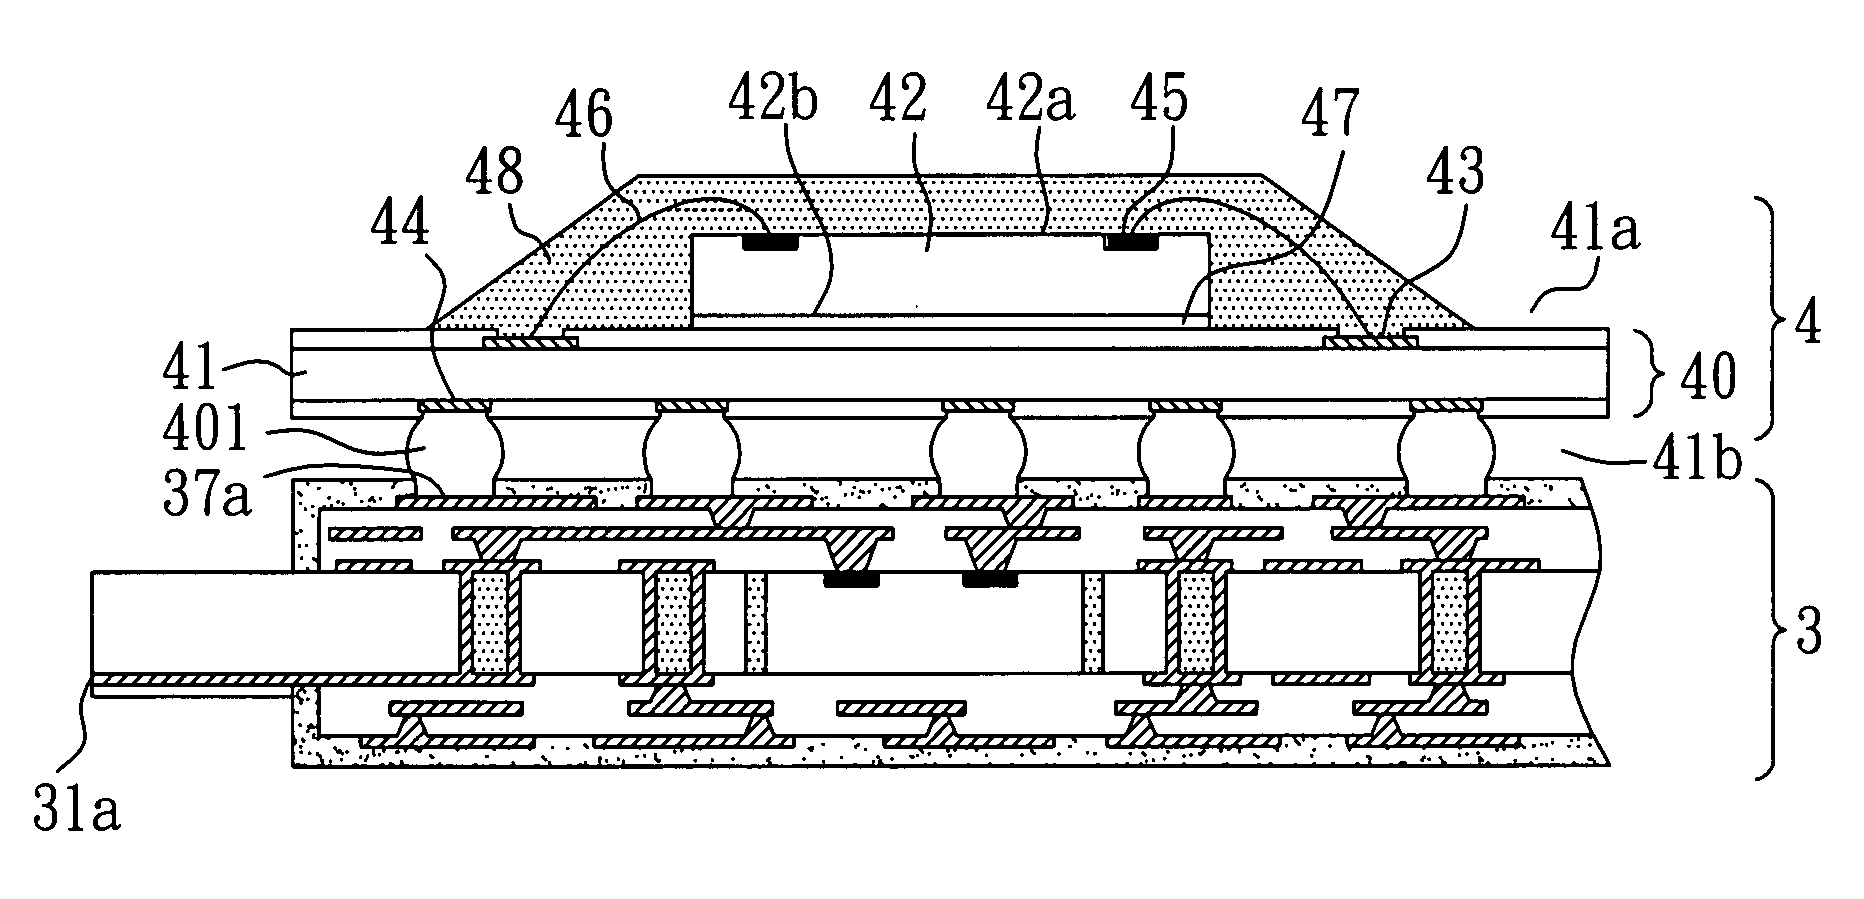 Stacked package module and board having exposed ends